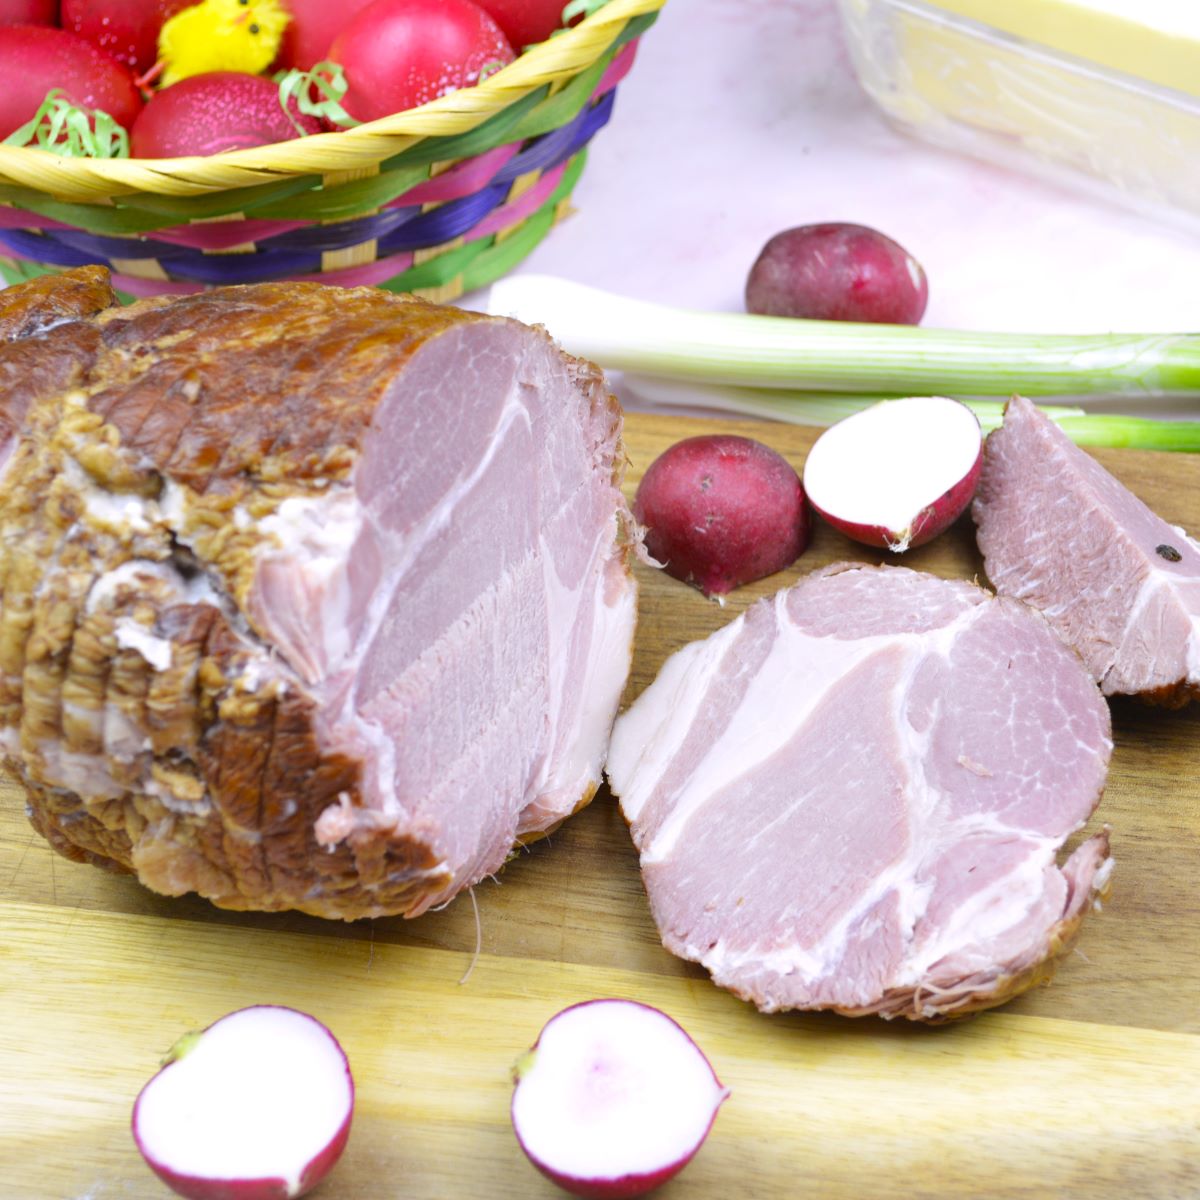 Best Easter Ham Recipe-Sliced Ham Served on Chopping Board With Radish and Spring Onions